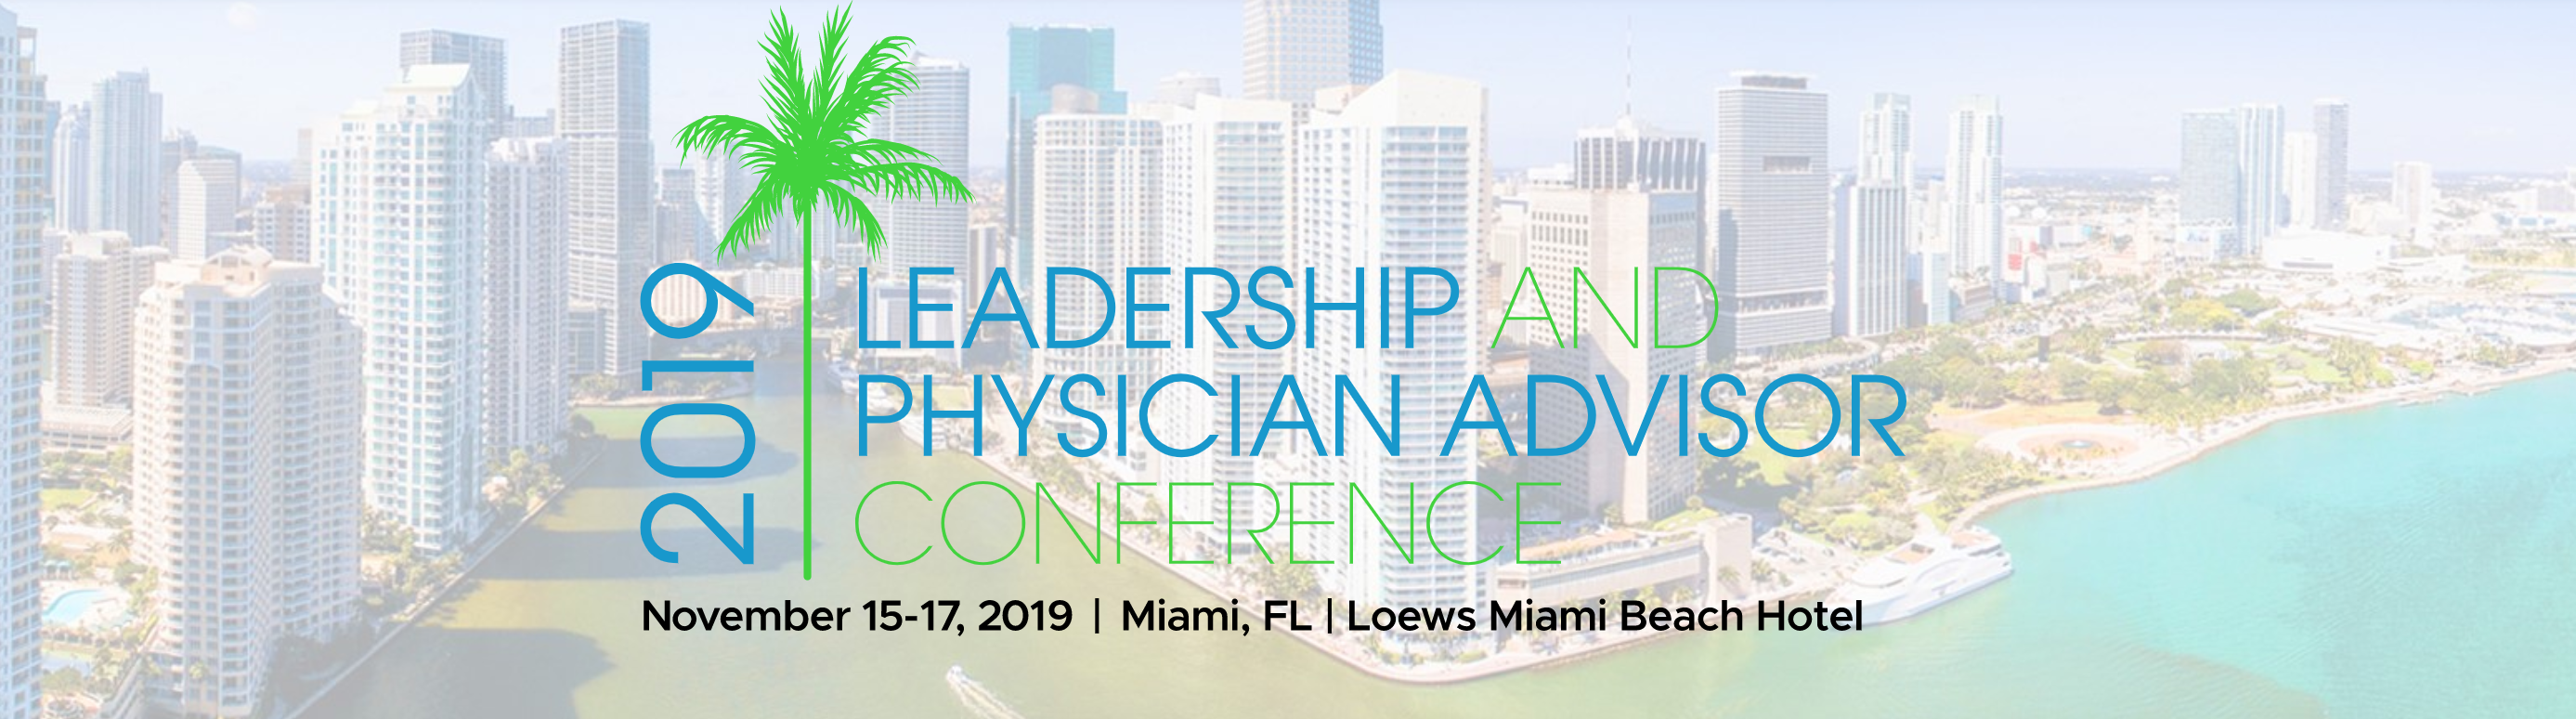 Leadership and Physician Advisor Conference 2019